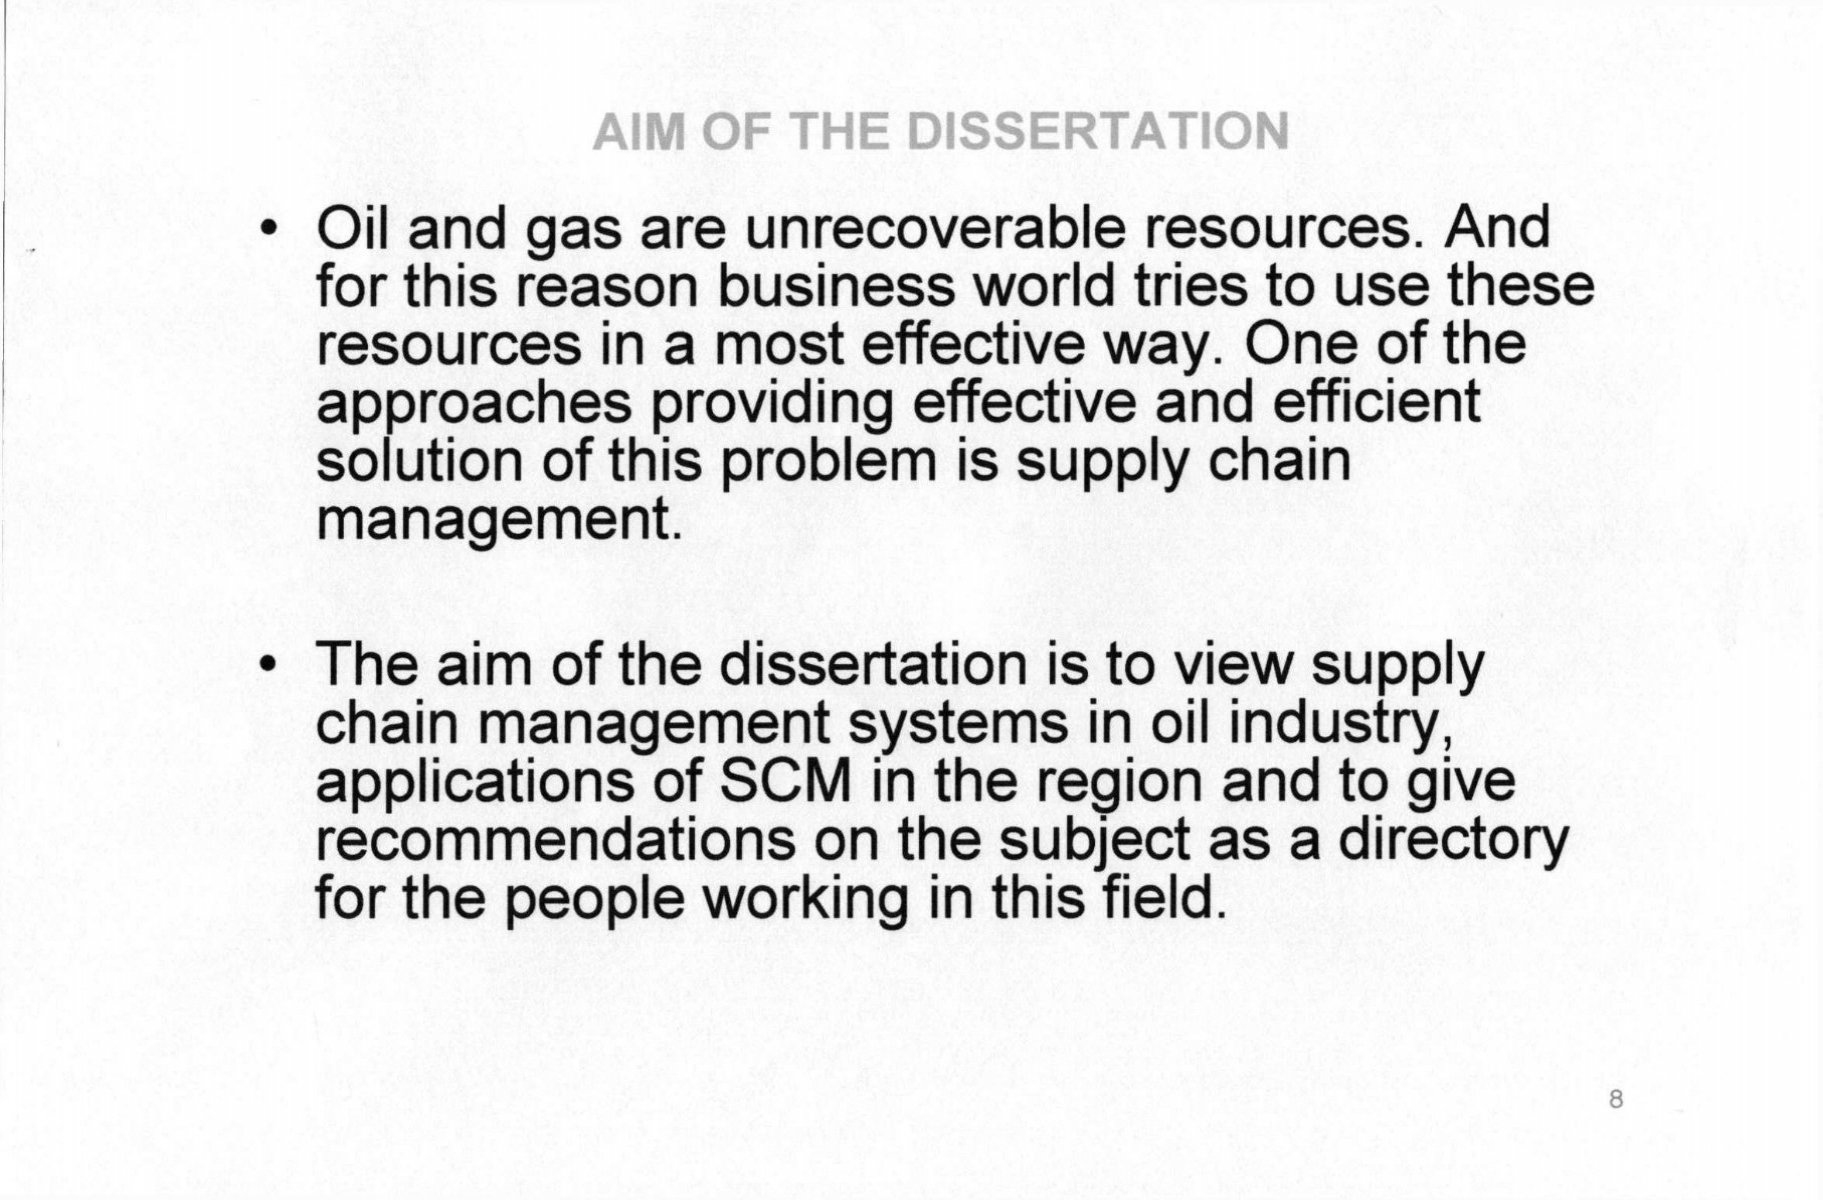 phd thesis in oil and gas management